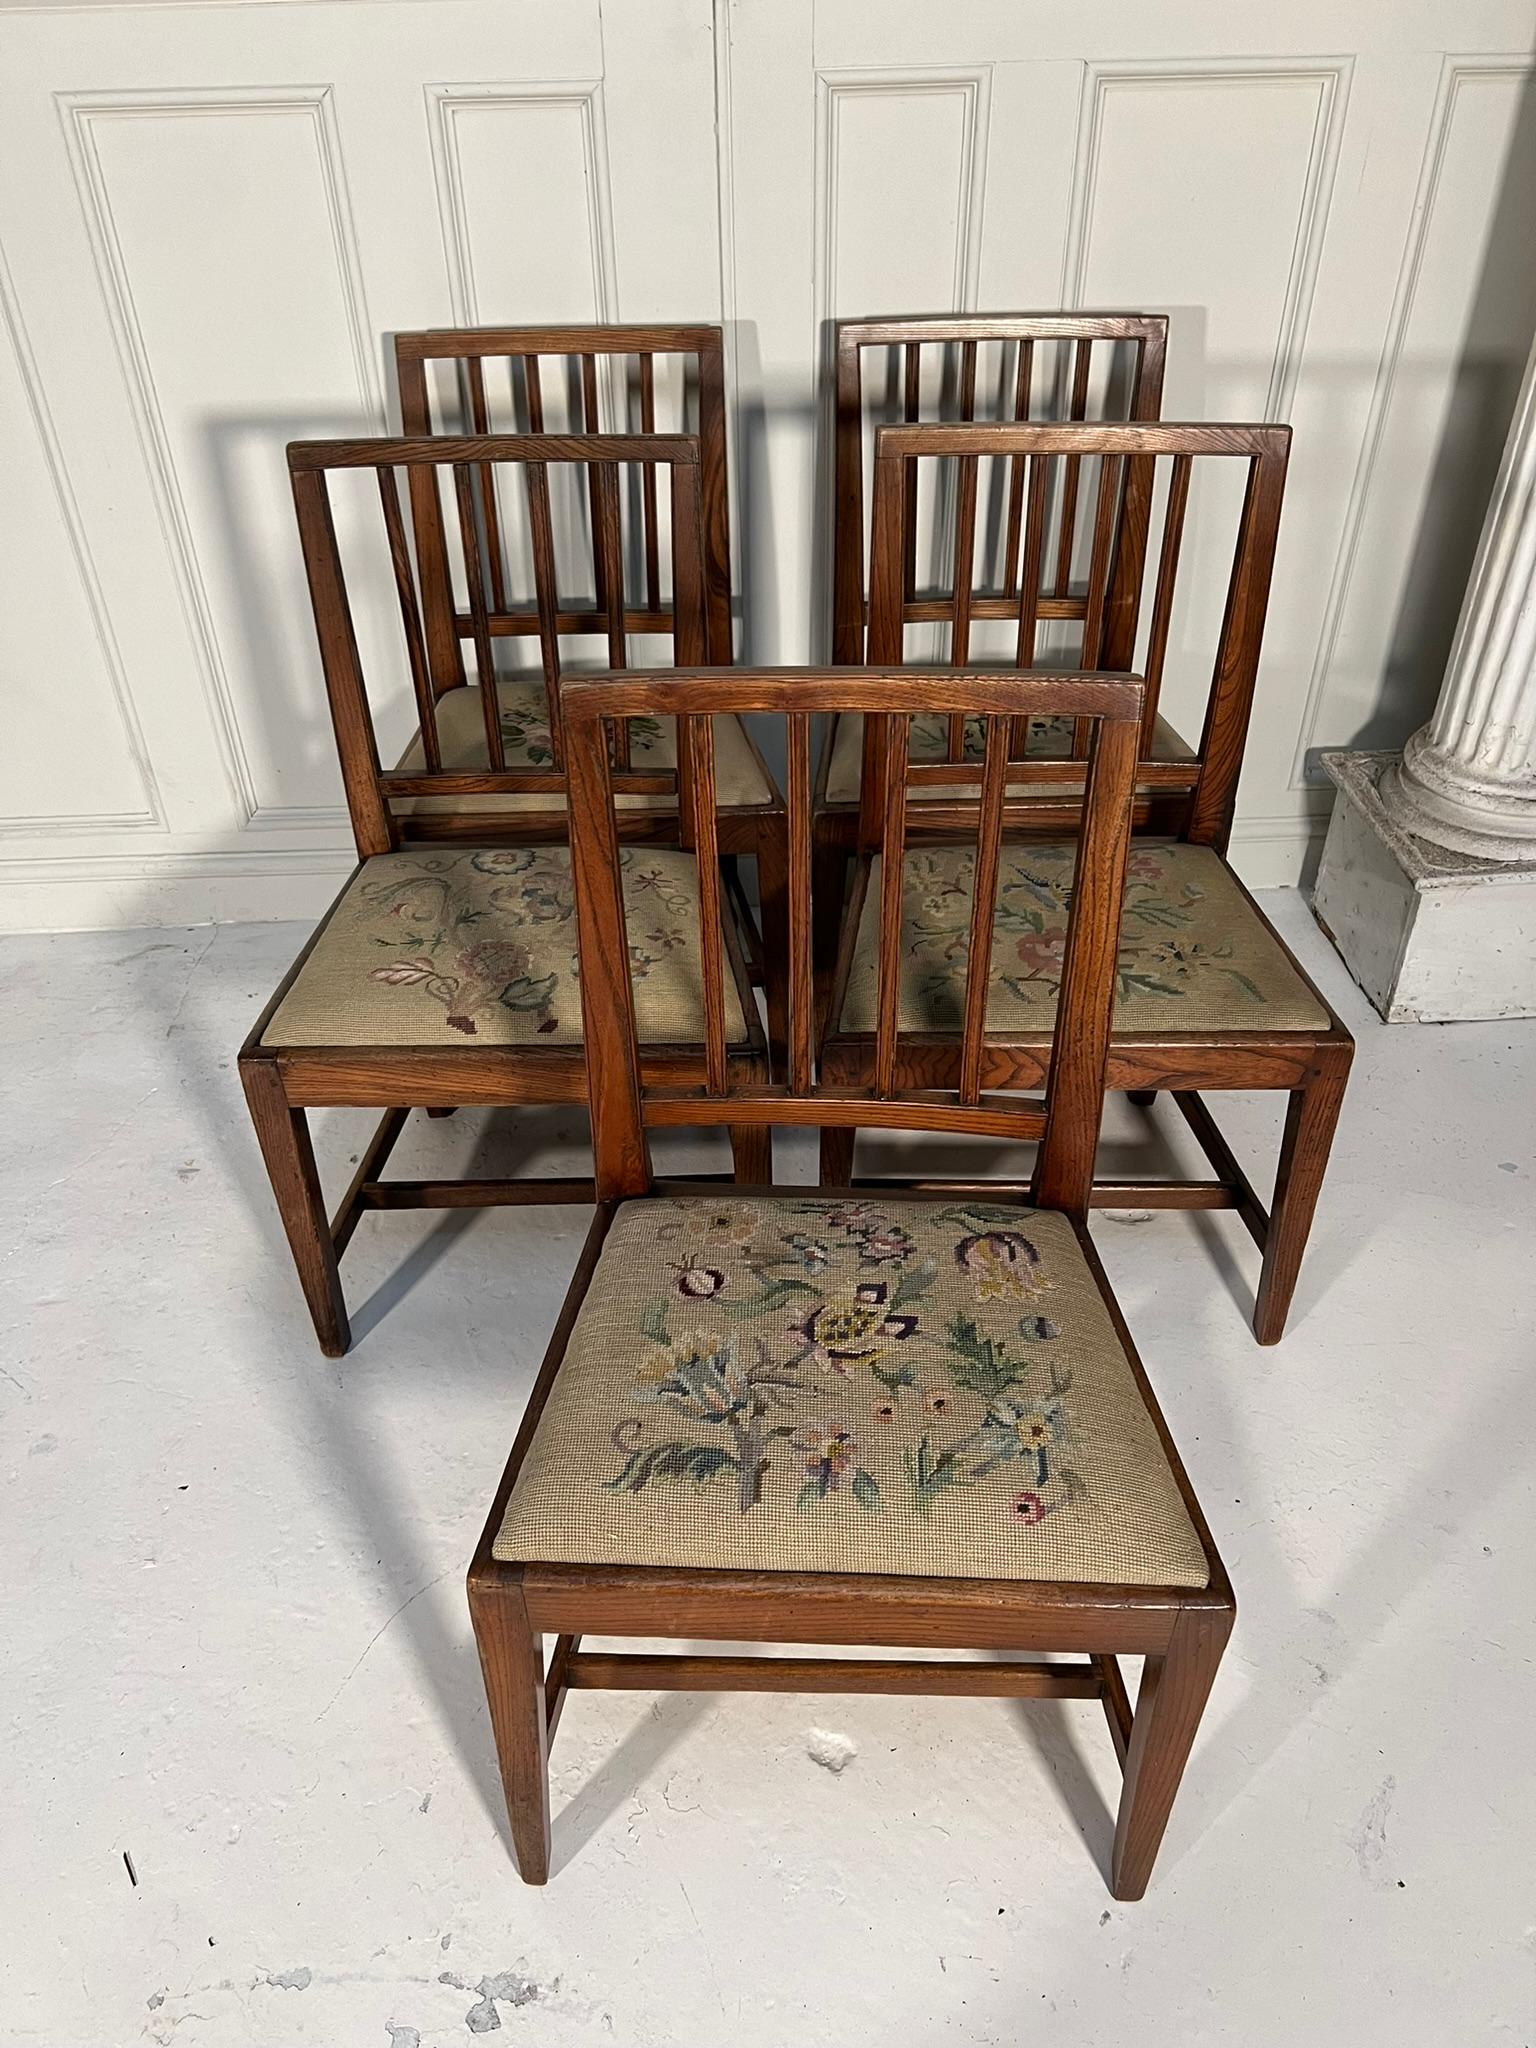 Set of 6 dining chairs (1 carver)

Late 19th century Scottish chairs with drop in seats.

Constructed from Ash with hand stitched seat covers each with an individual design.

All seats are in good condition.

All chairs are structurally sound.

No